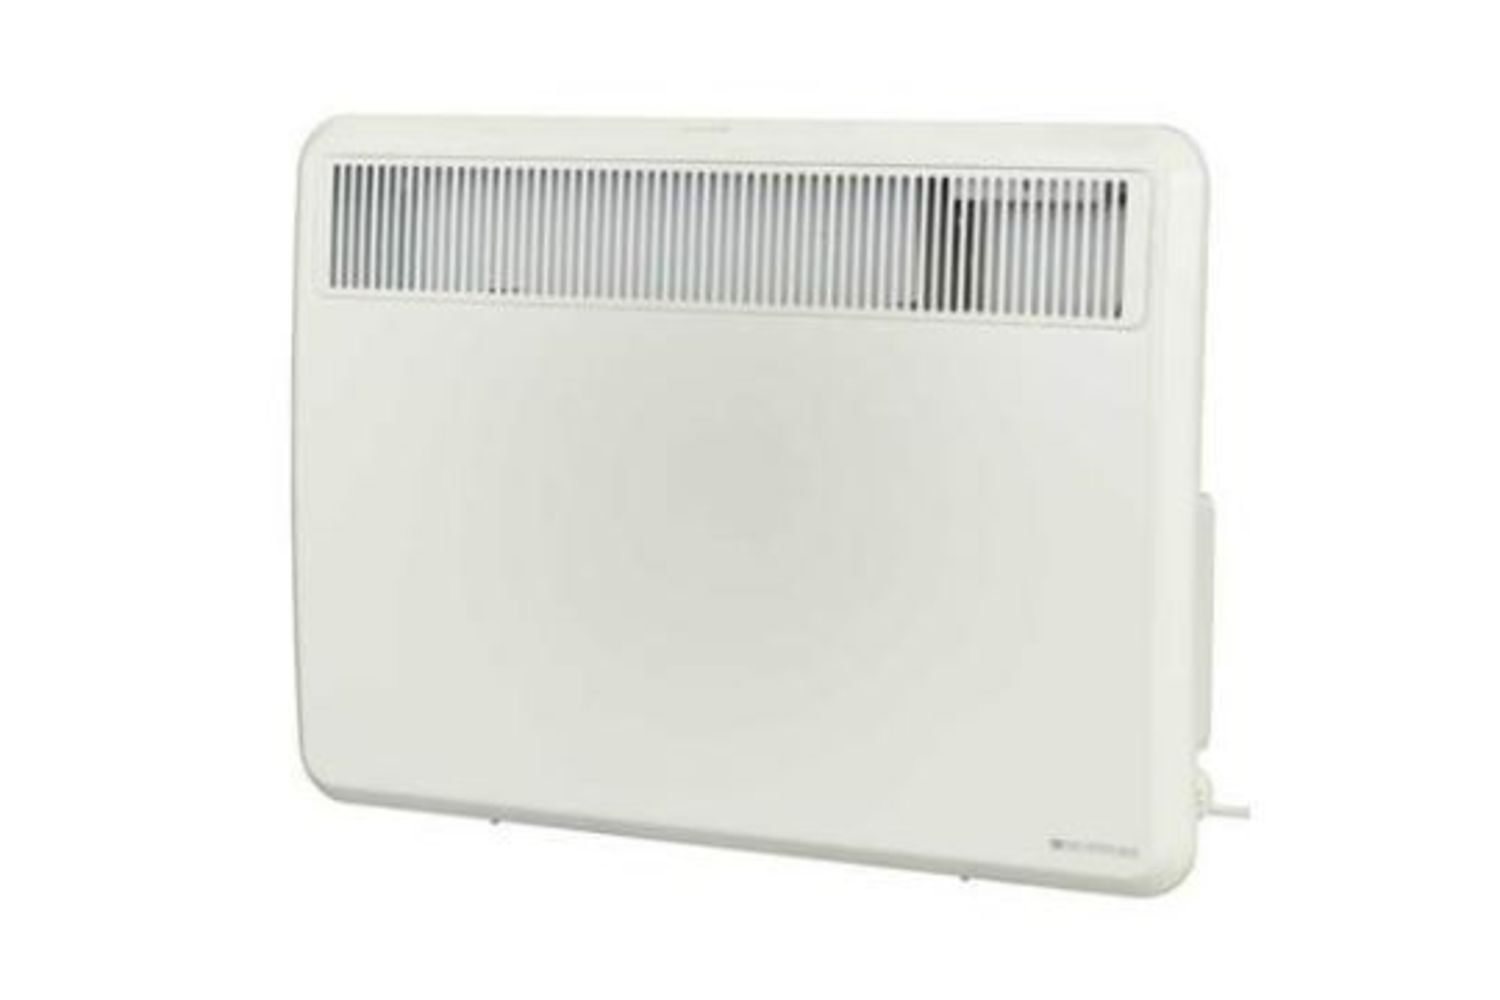 Trade Lots of Fans & New Boxed Convector Heaters, Panel Heaters & Radiators *Save on Energy* - Collection & Delivery Available